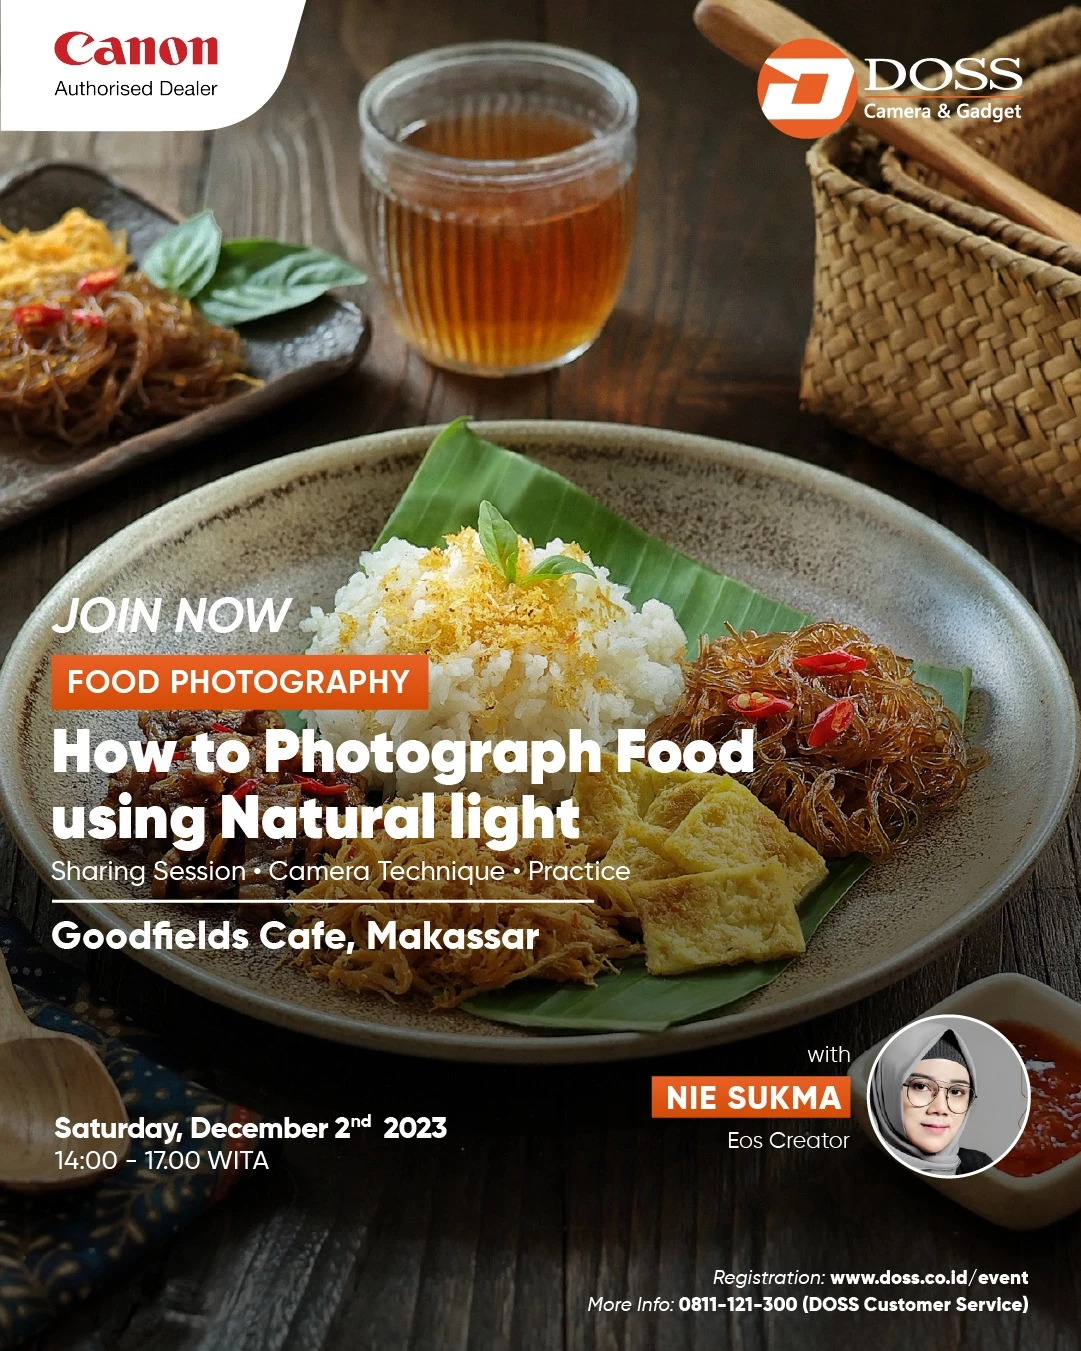 Nie Sukma (EOS Creator) - How to Photograph Food Using Natural Light